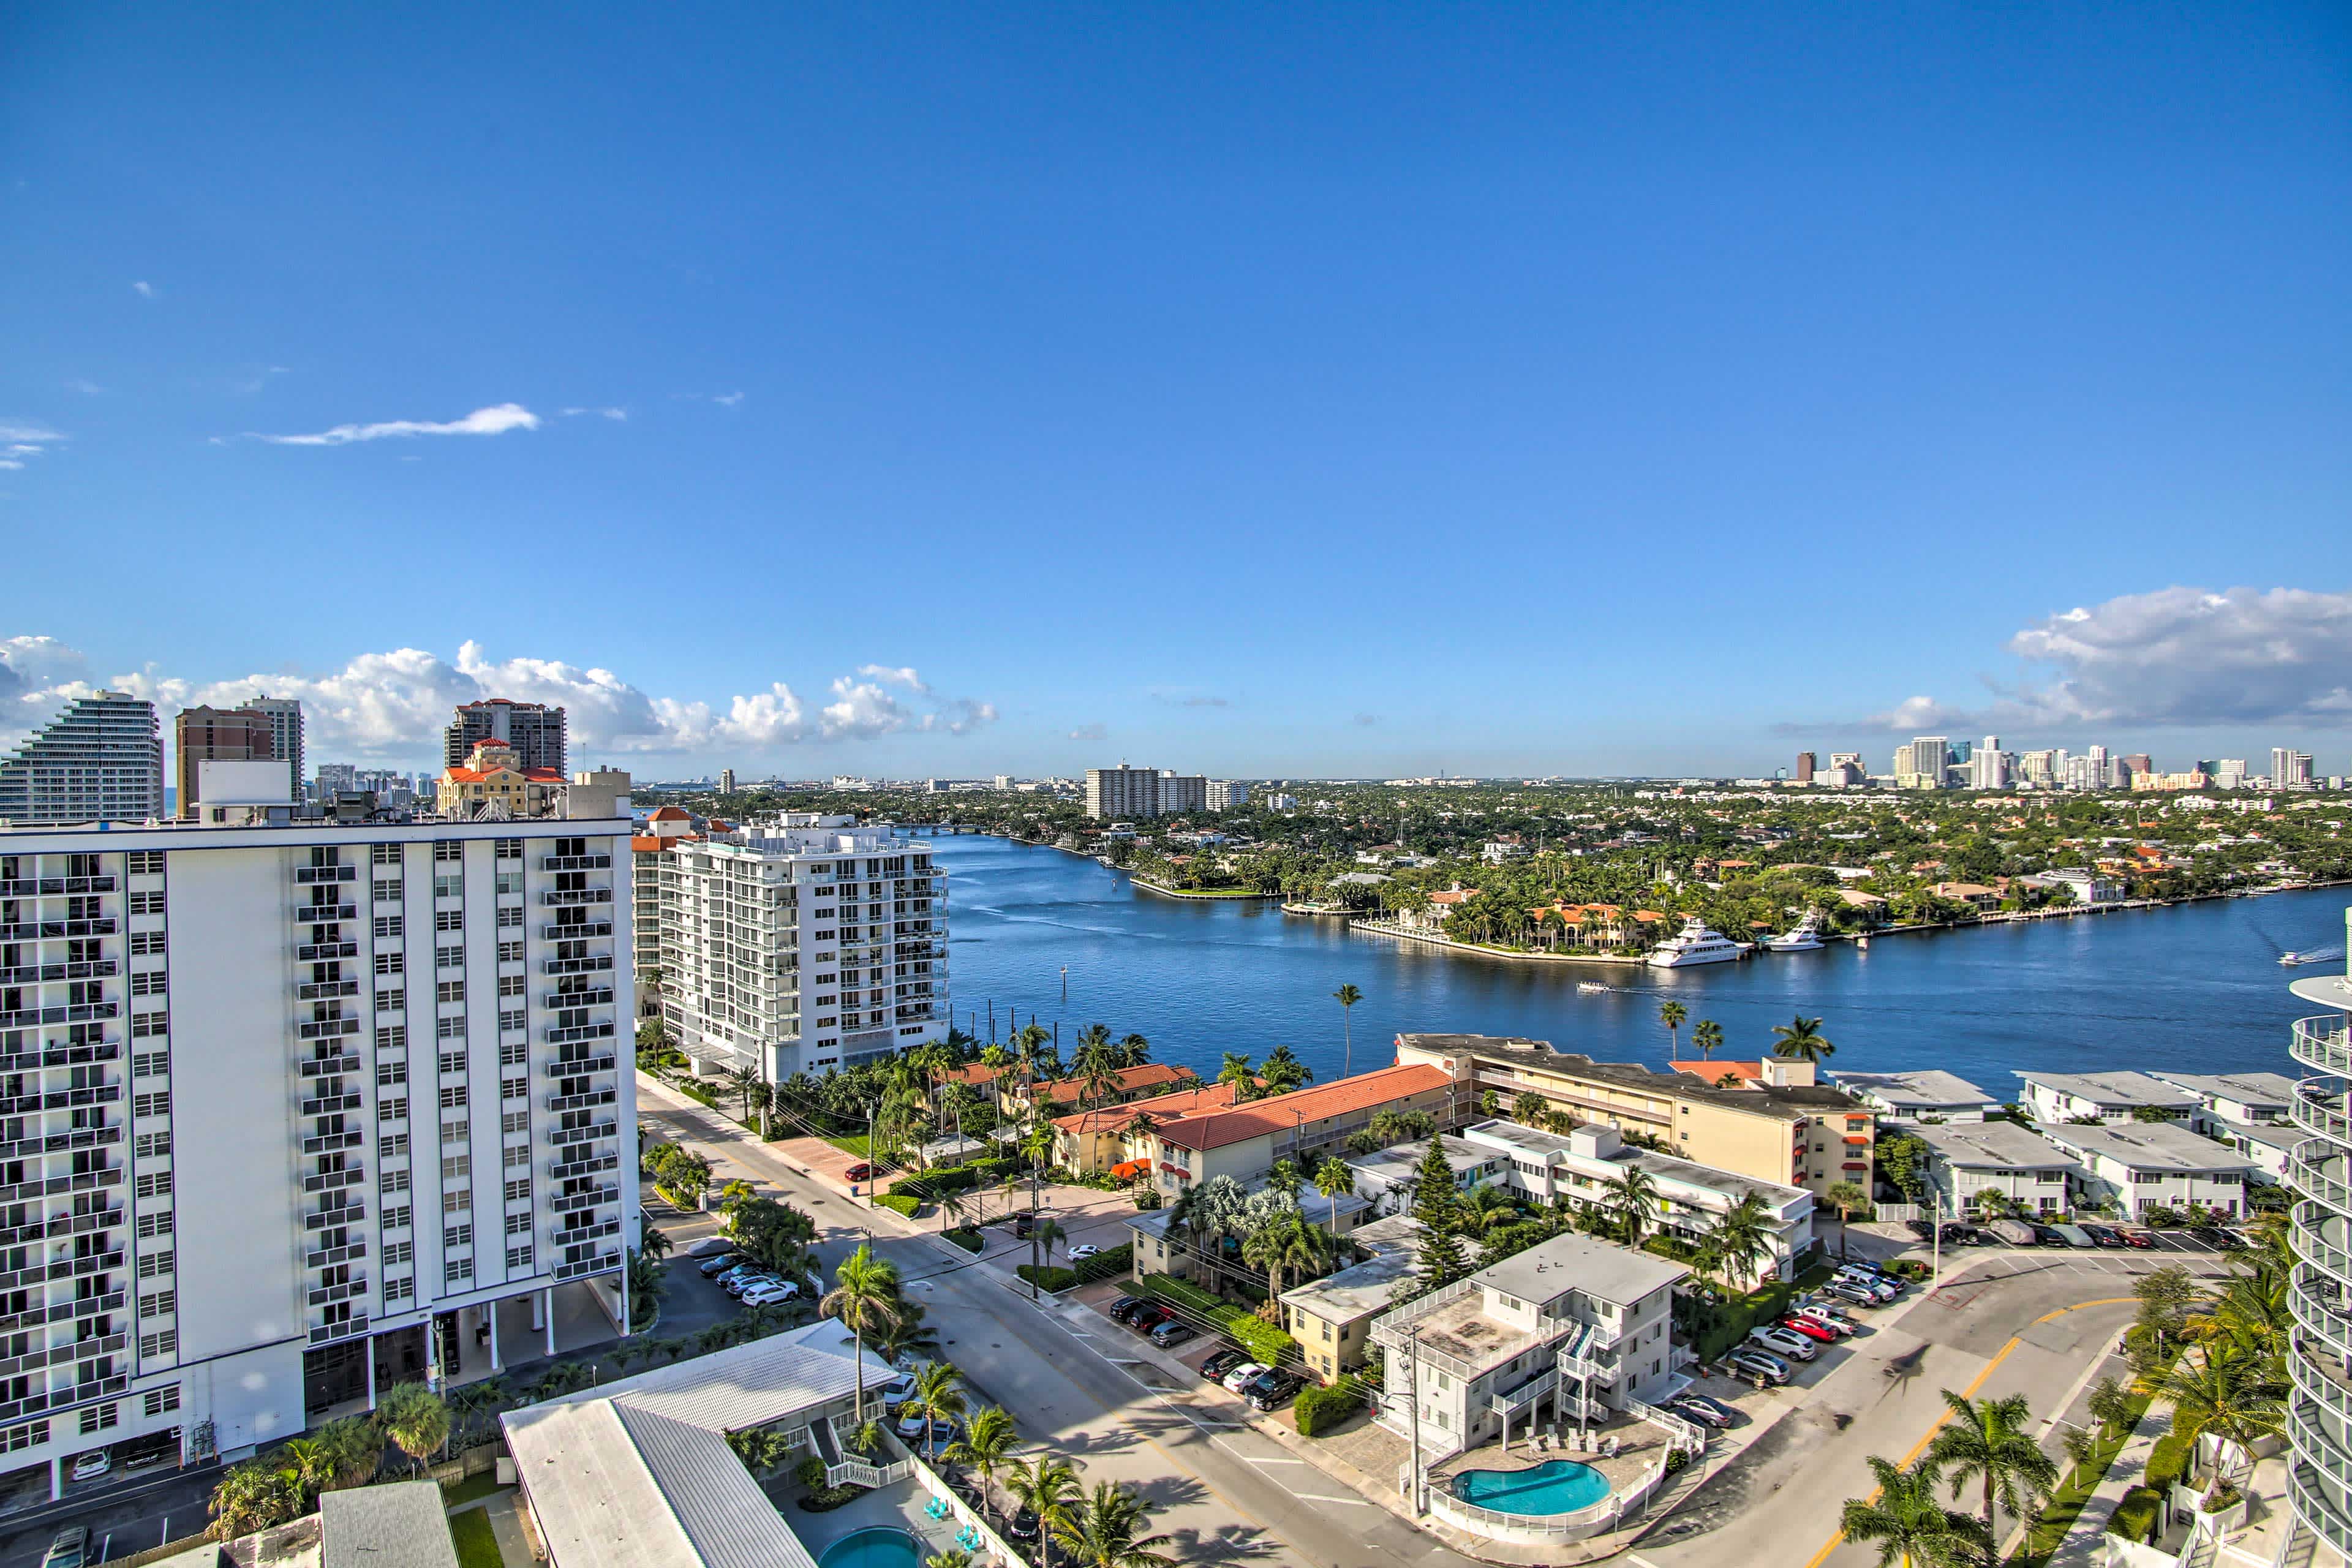 Aerial view of Fort Lauderdale, FL overlooking buildings, palm trees, and a blue river and blue skies